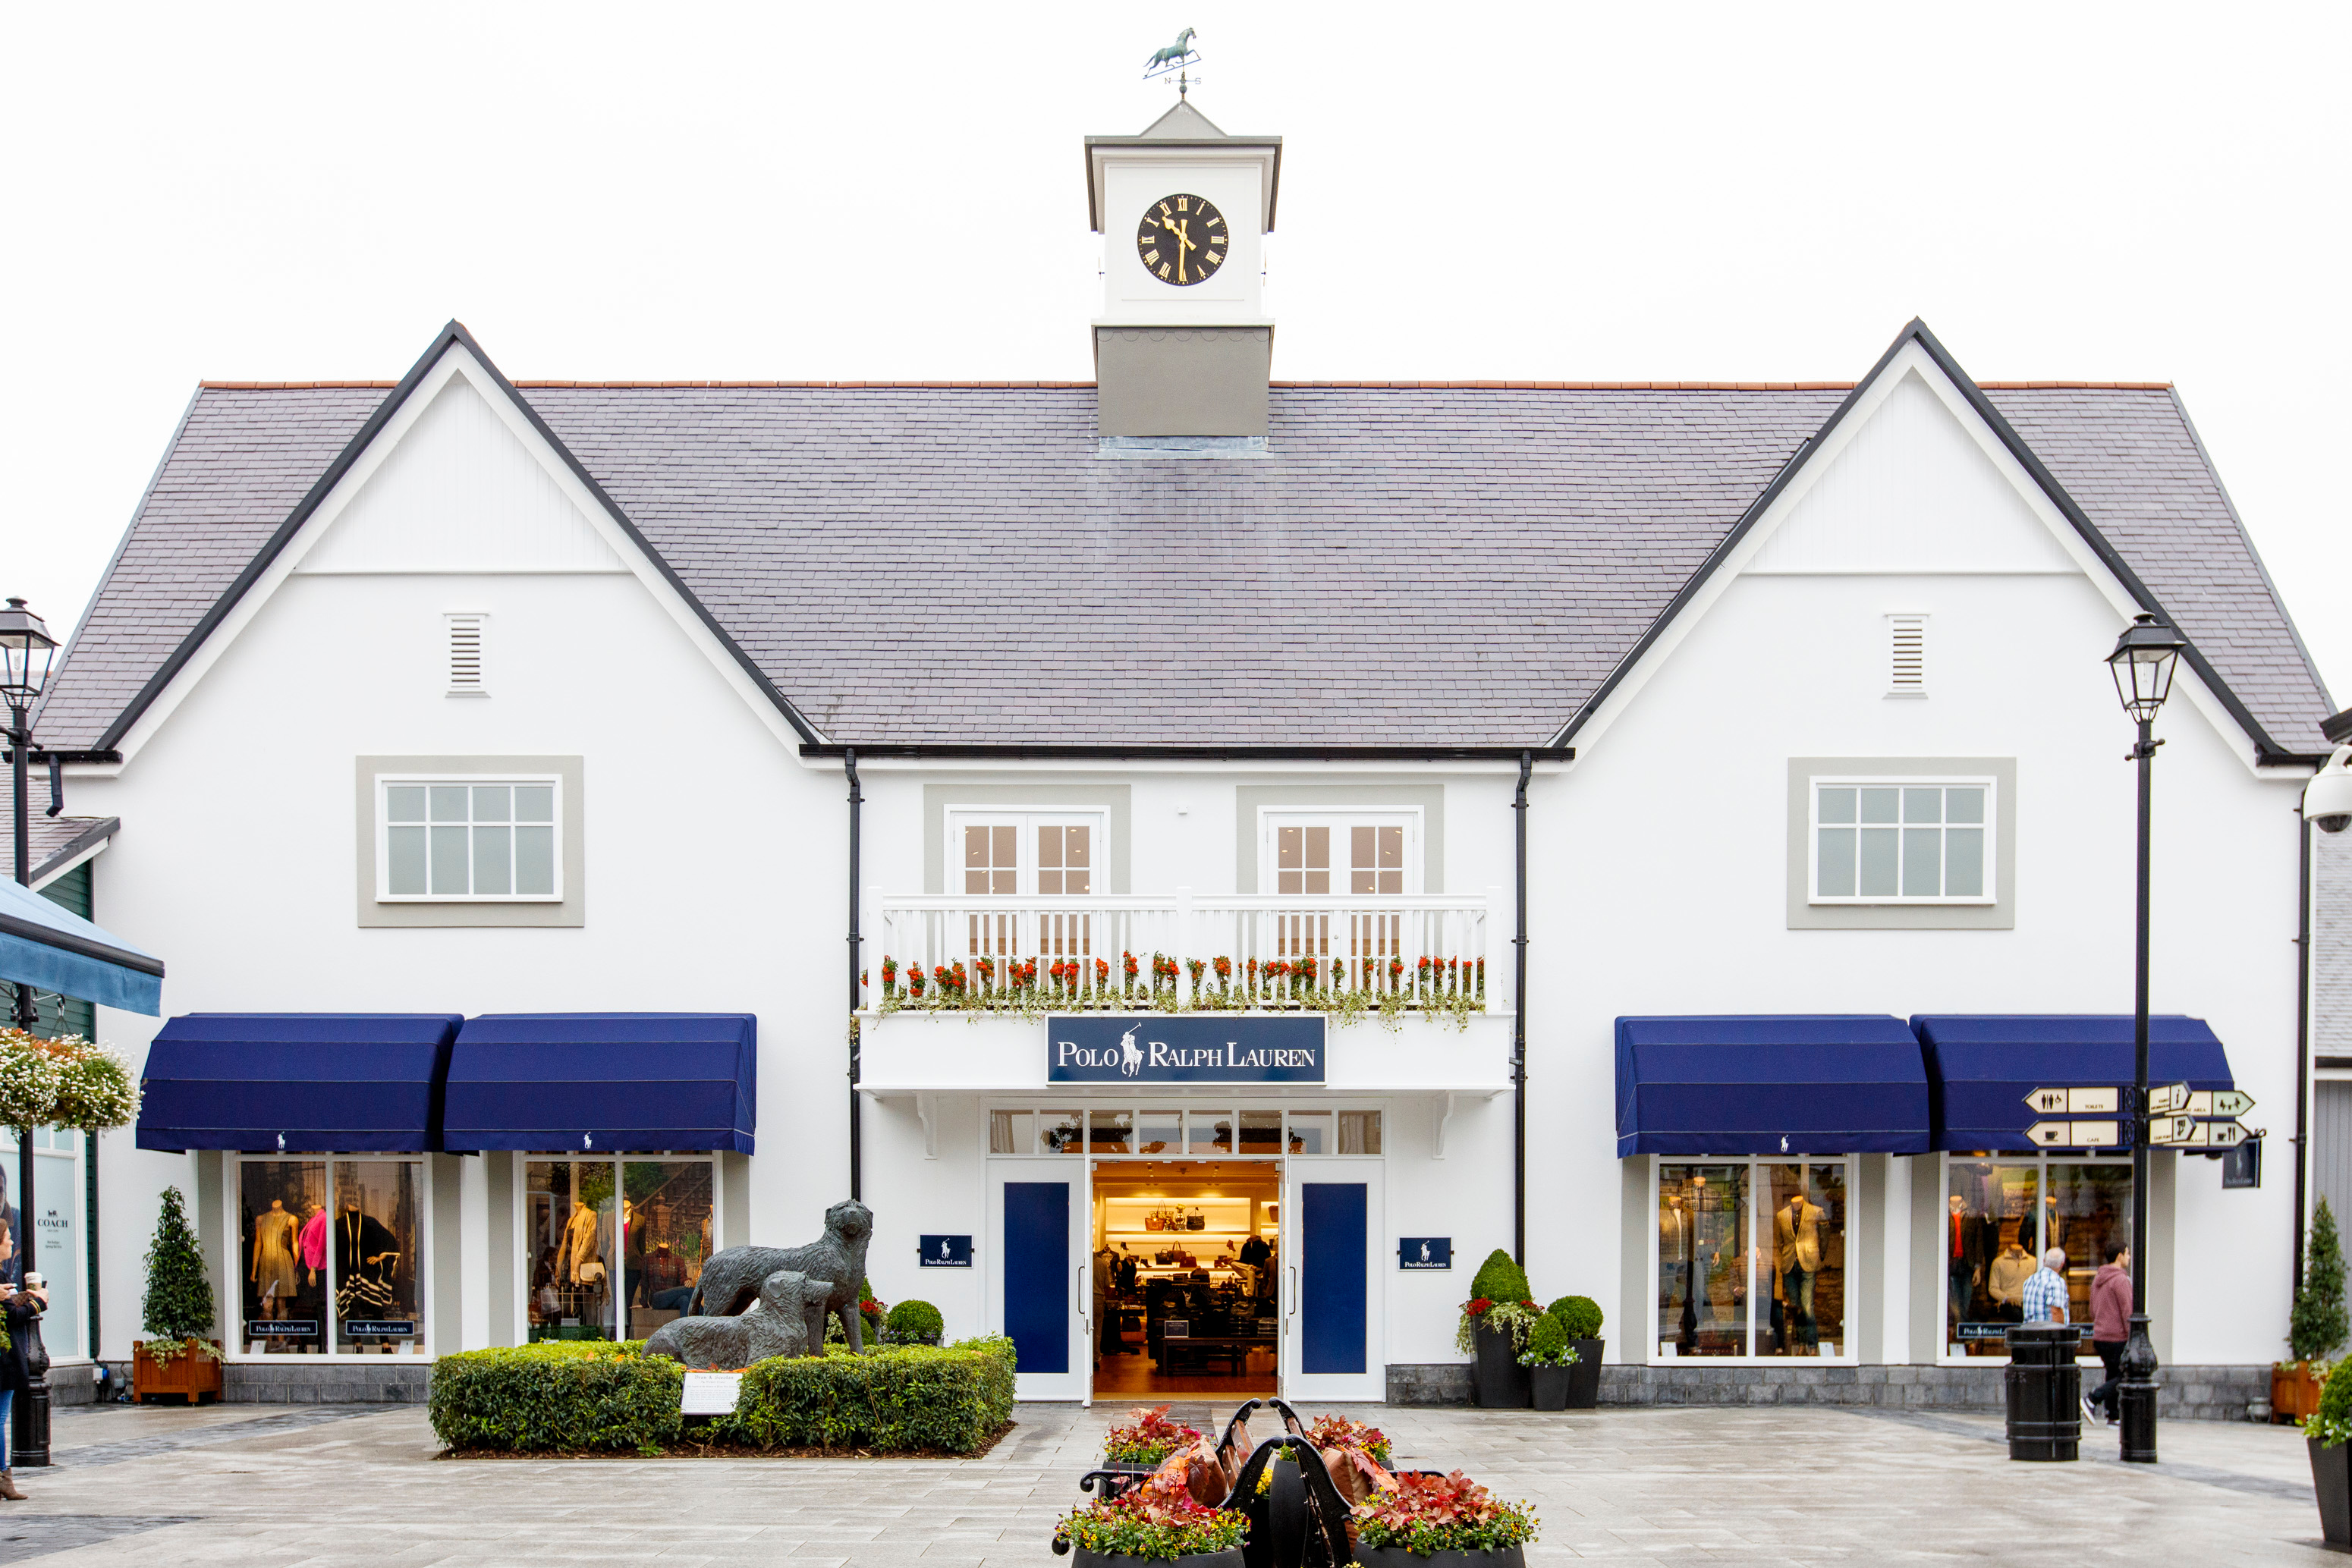 Polo Ralph Lauren Outlet Store Kildare - CLOTHING AND ACCESSORIES, SHOPPING  CENTRES AND LARGE STORES, MEN'S CLOTHING (RETAIL), WOMEN'S CLOTHING  (RETAIL), CLOTHING ACCESSORIES (RETAIL), Kildare - Polo Ralph Lauren Outlet  Store Kildare